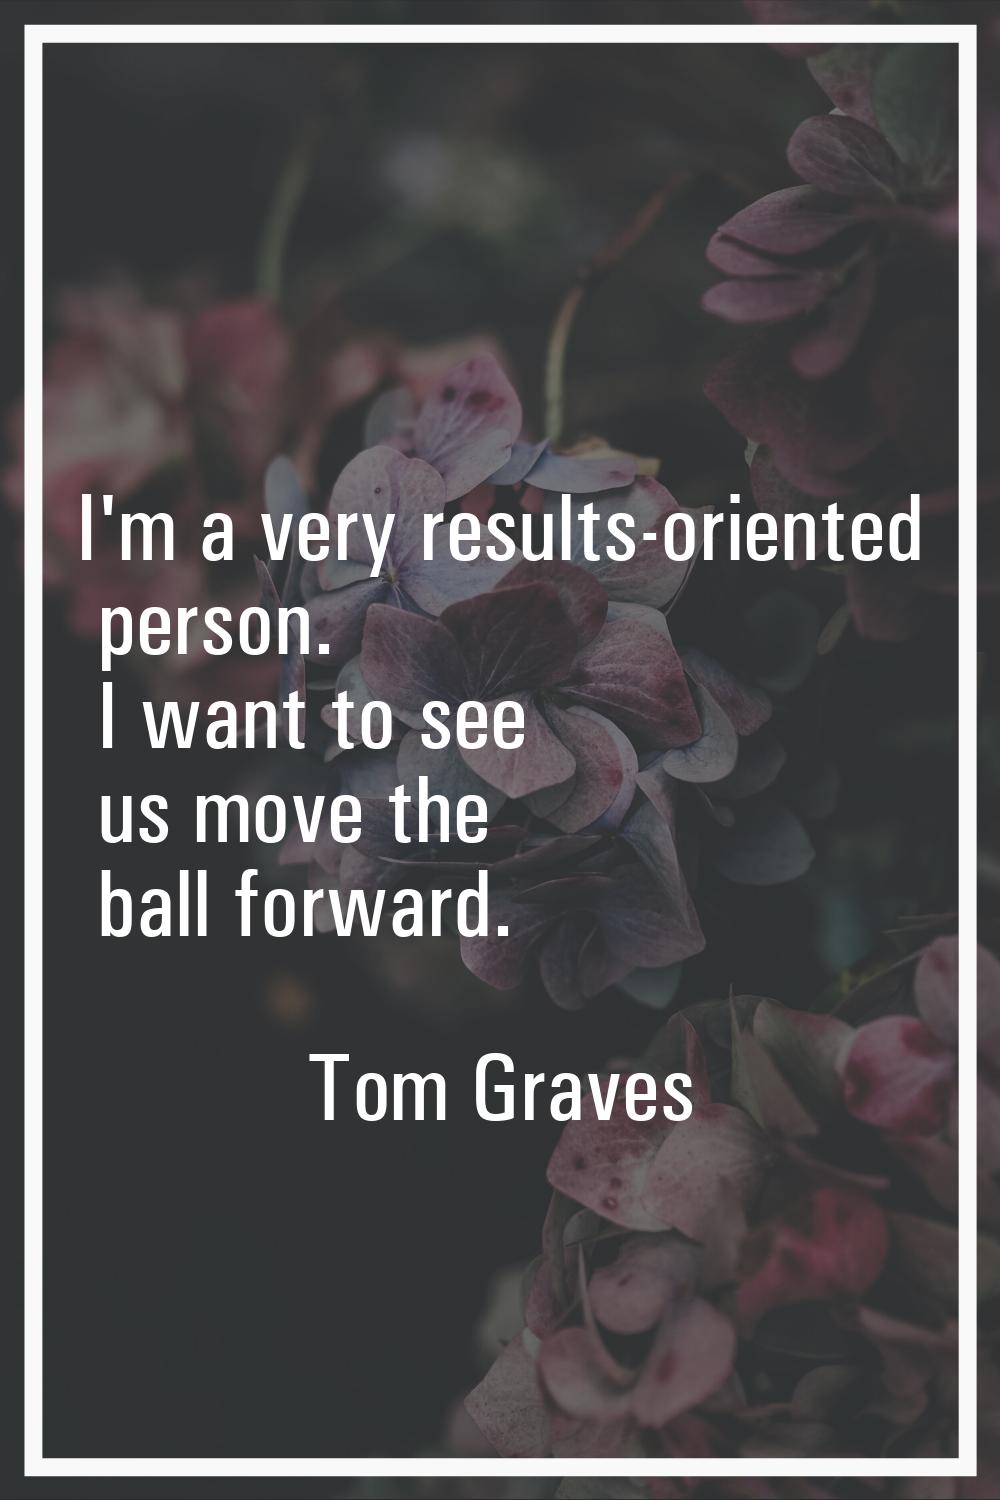 I'm a very results-oriented person. I want to see us move the ball forward.